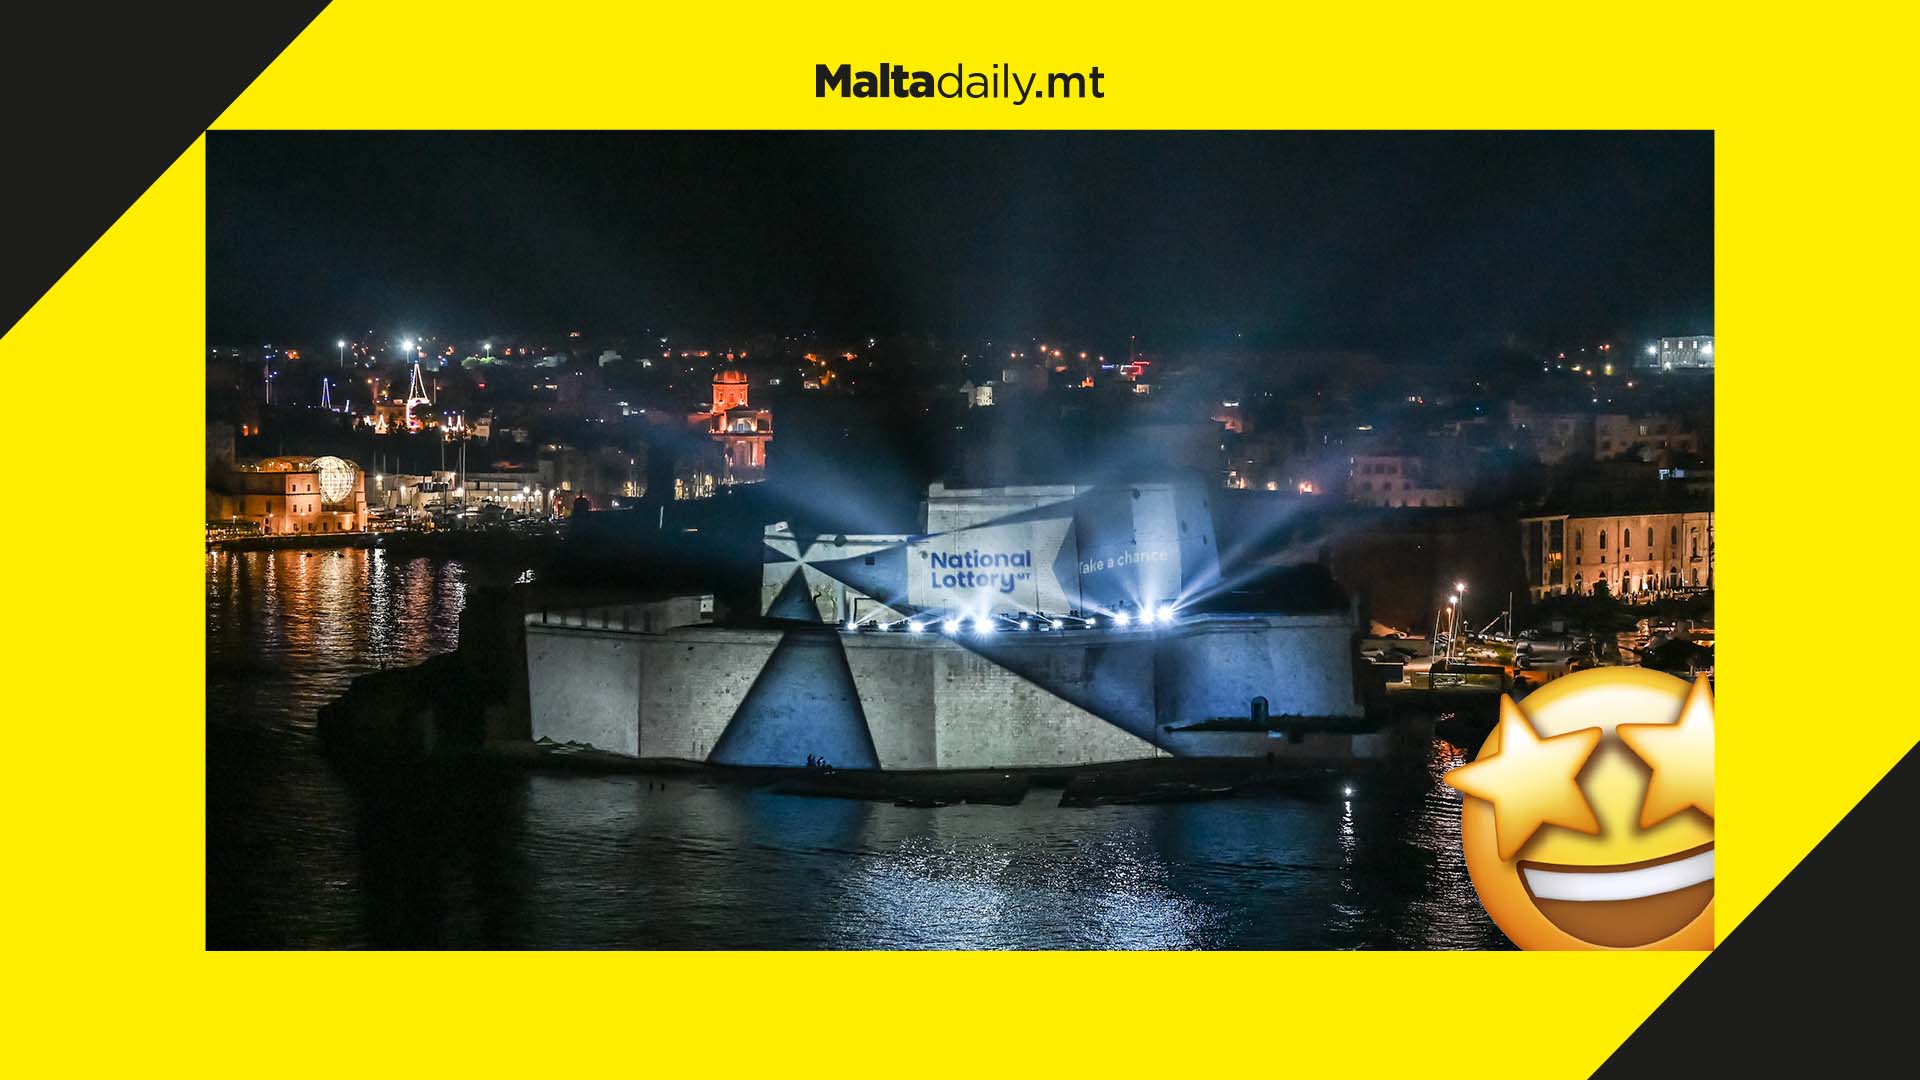 "It all starts here"; National Lottery of Malta kicks off with BIG THINGS ahead